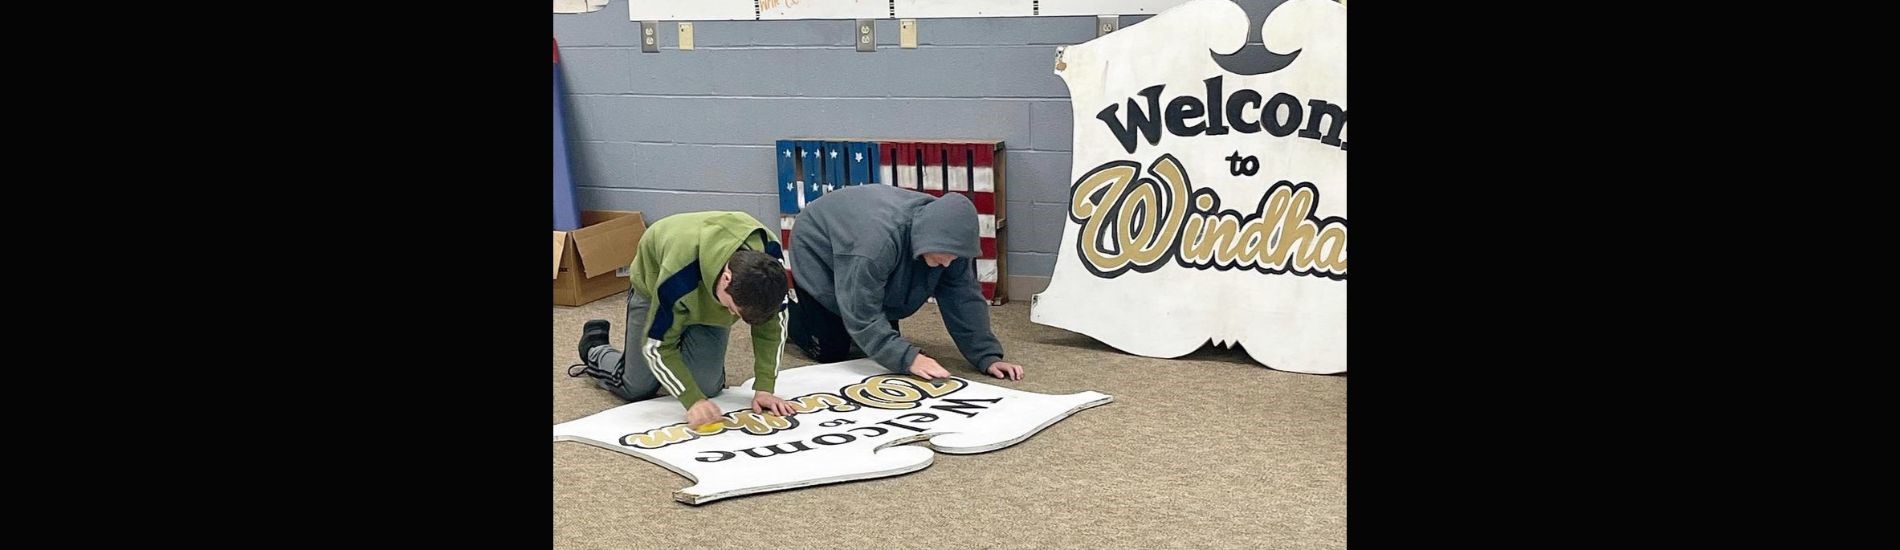 Junior high students work on painting a new community sign for Windham.